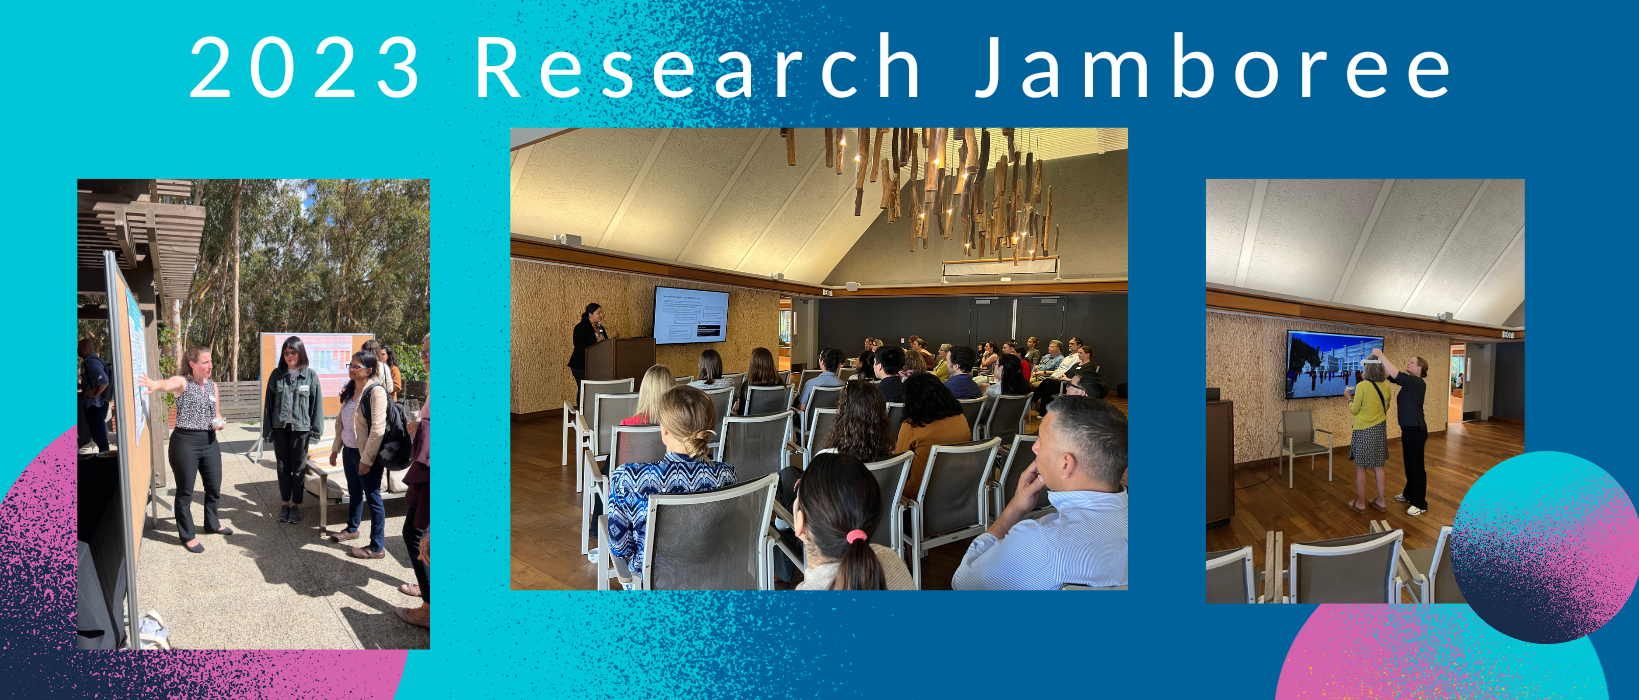 1 of 5, Three images of various aspects of the TECH Center Research Jamboree: one the far left, 3 individual chatting around a poster presentation, in the center, a presenter giving a lightning talk to a room of individuals, and on the right, and 2 individuals testing a VR platform